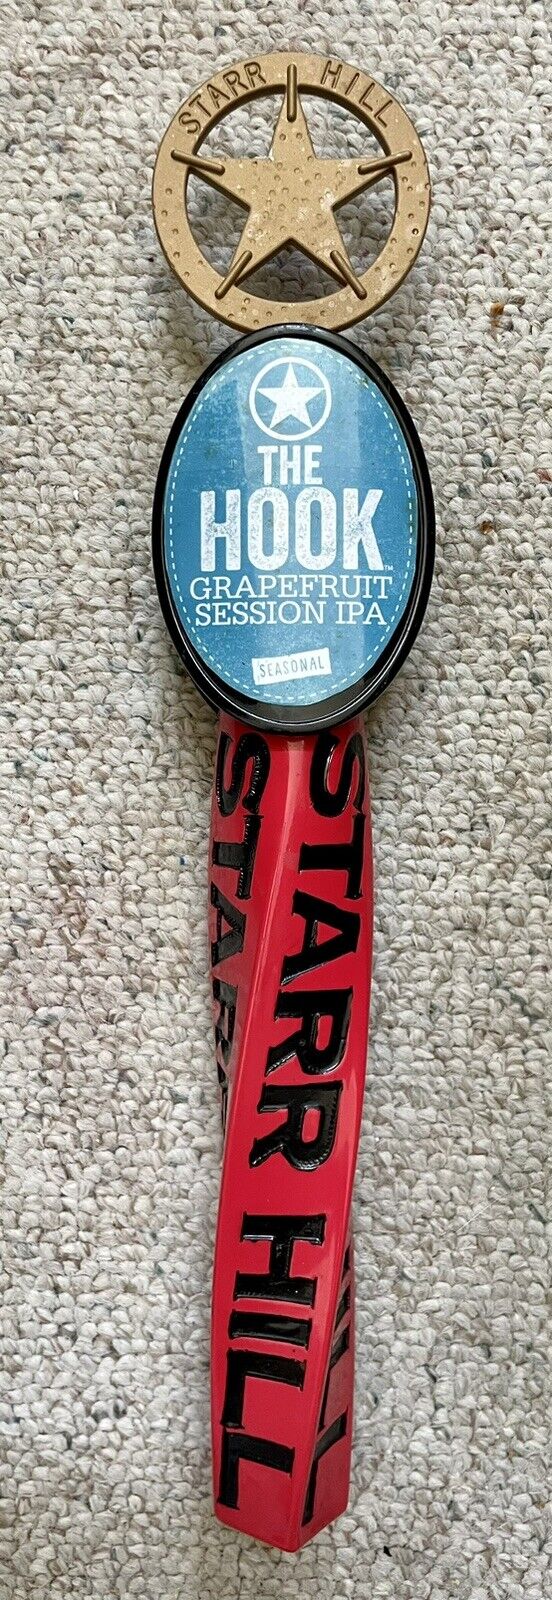 Starr Hill Grapefruit Session IPA tap handle